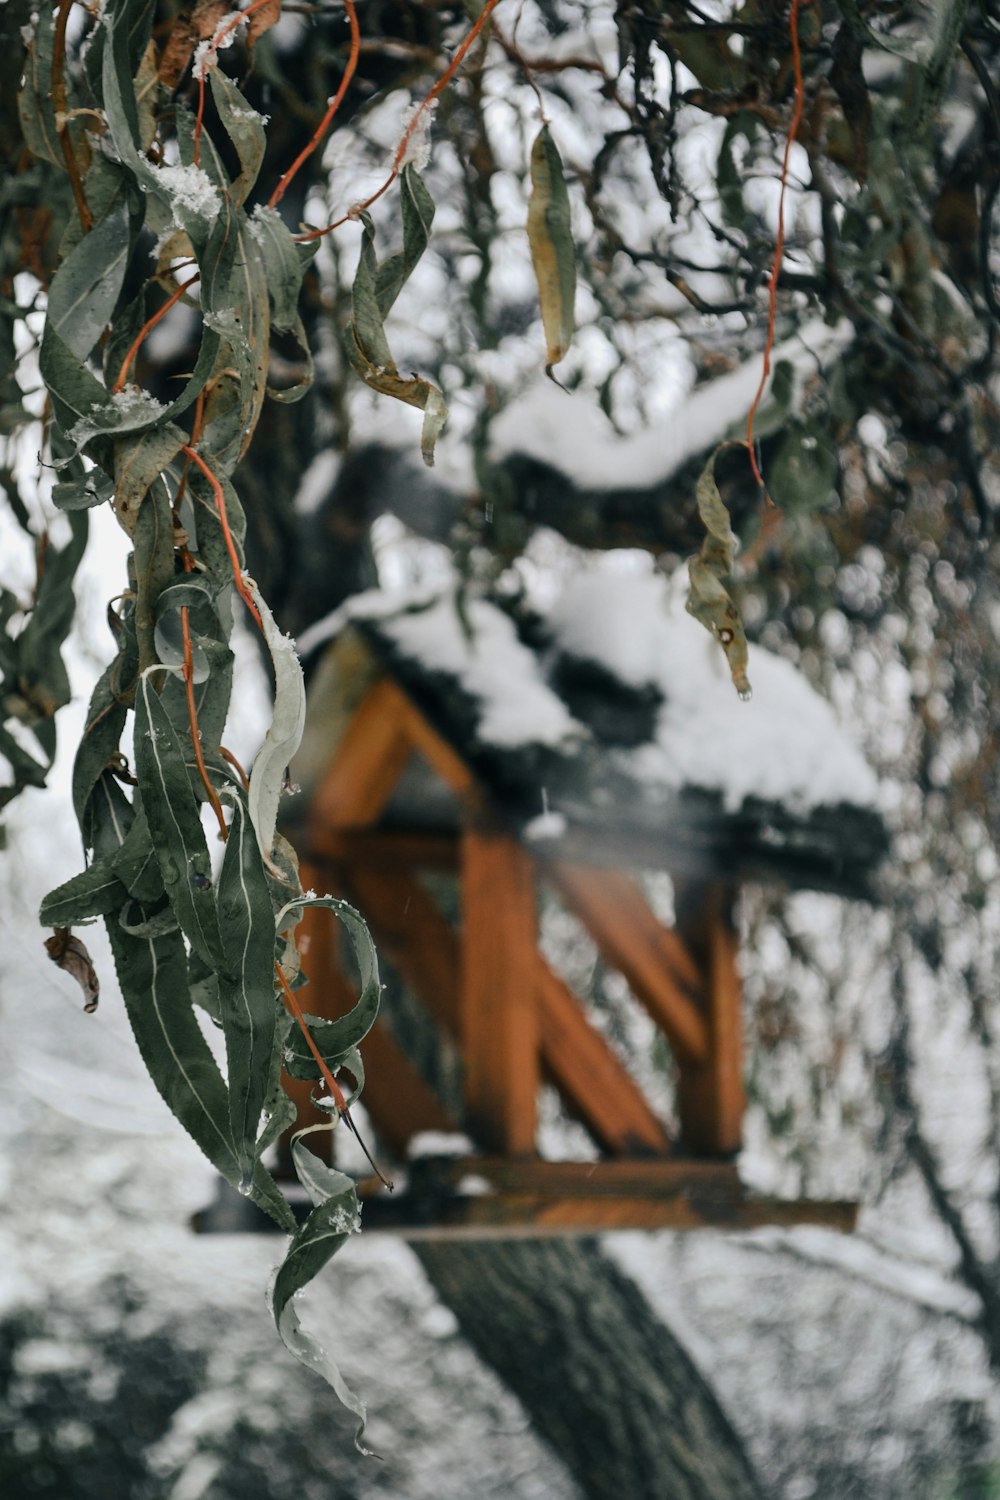 a bird house in a tree covered in snow